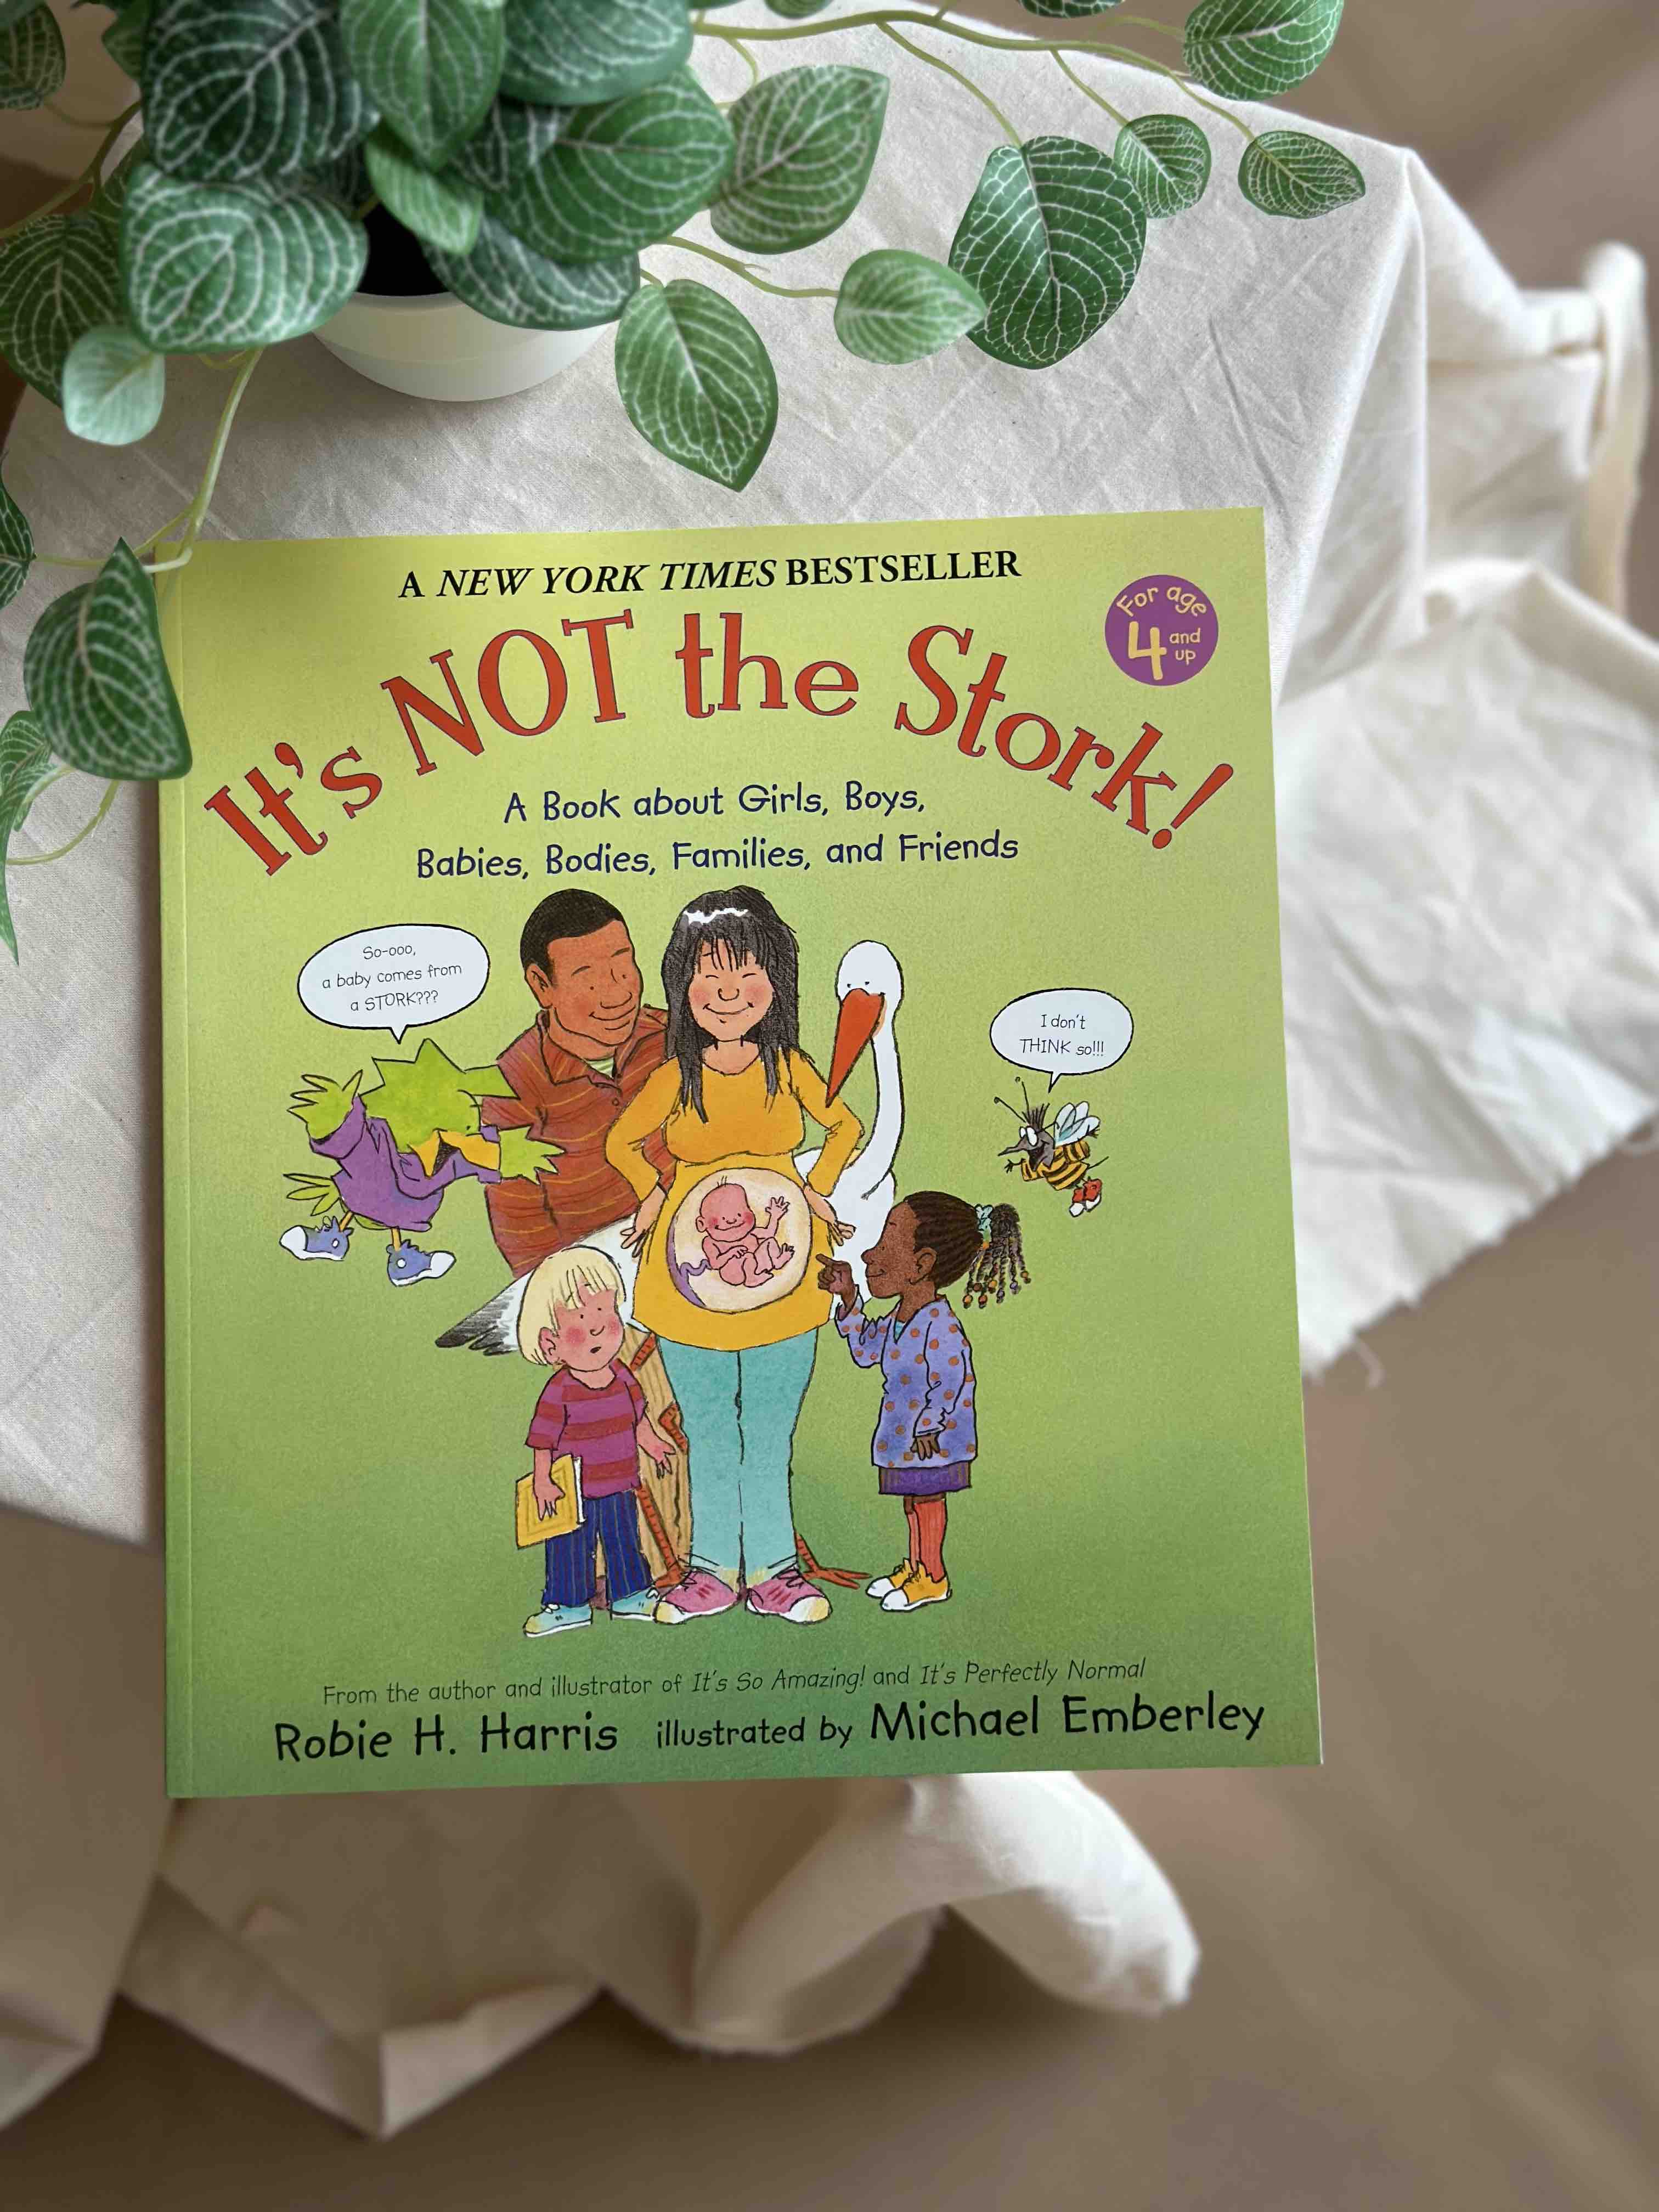 It's Not the Stork! : A Book about Girls, Boys, Babies, Bodies, Families and Friends [Book]